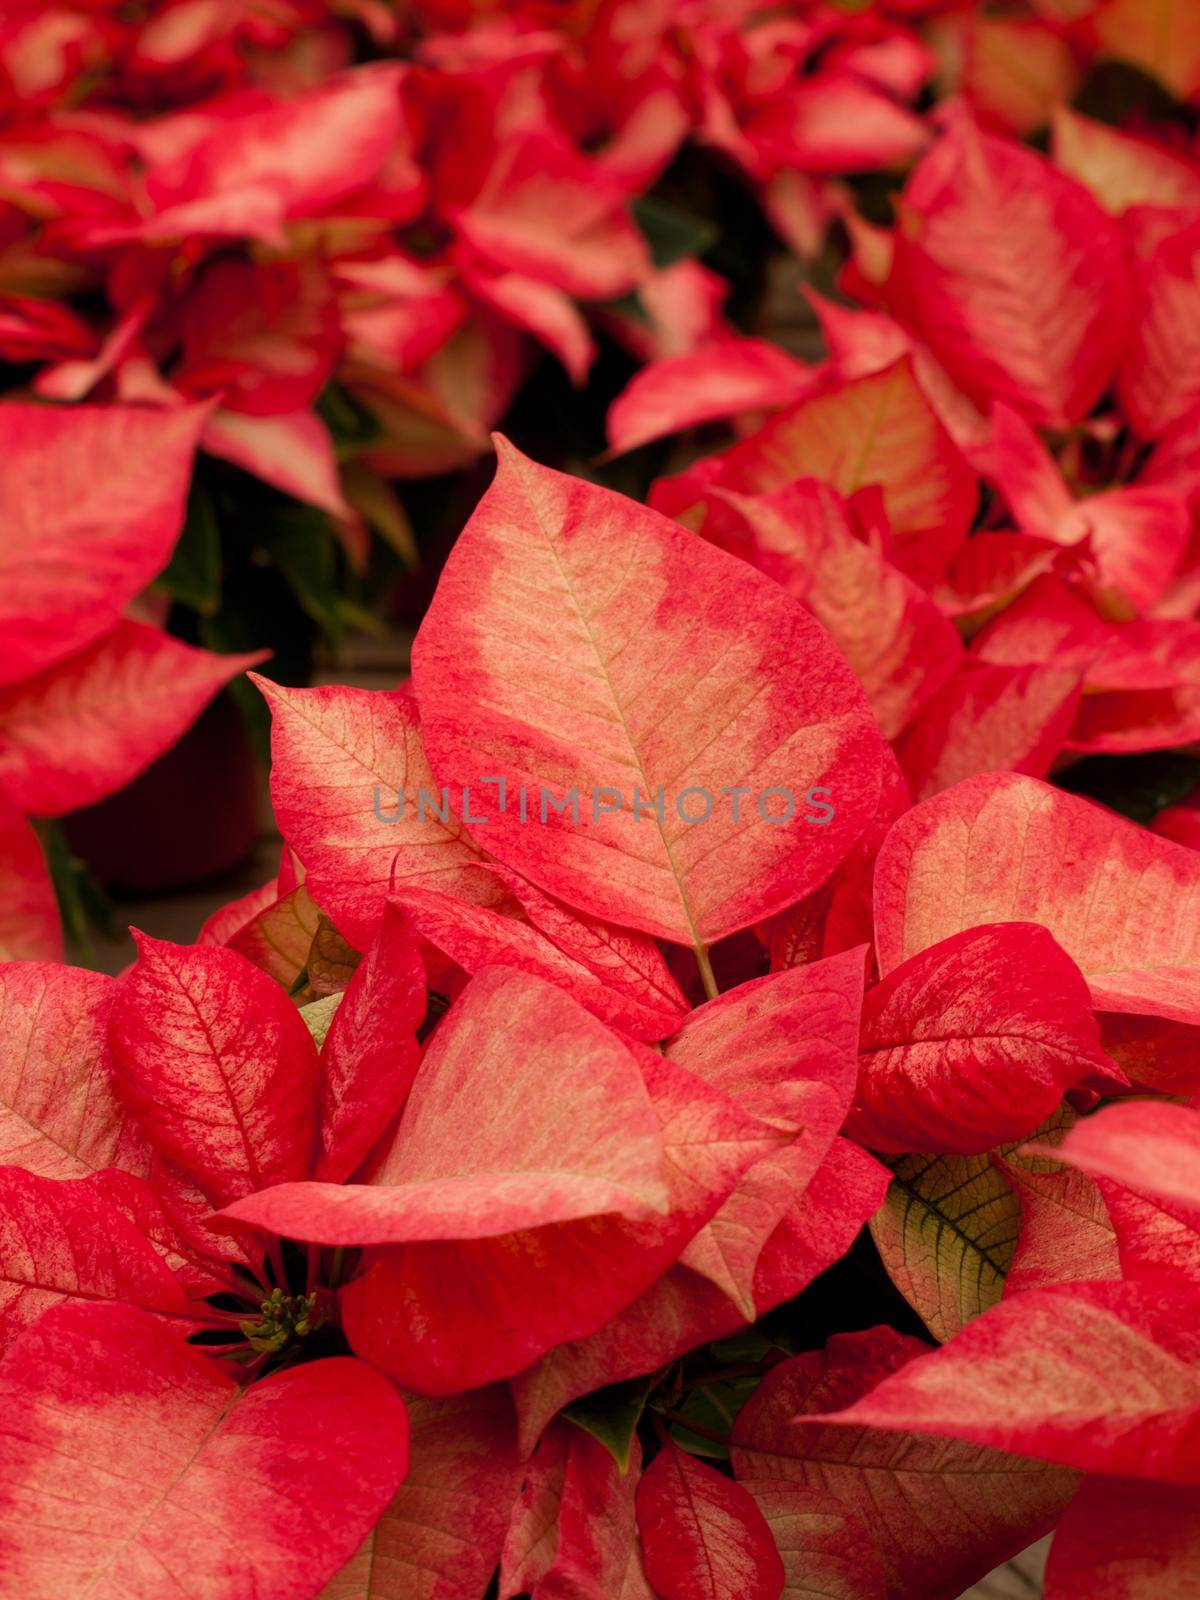 Rows of red poinsettia plants being grown at a Colorado nursery in preparation for the holiday season.